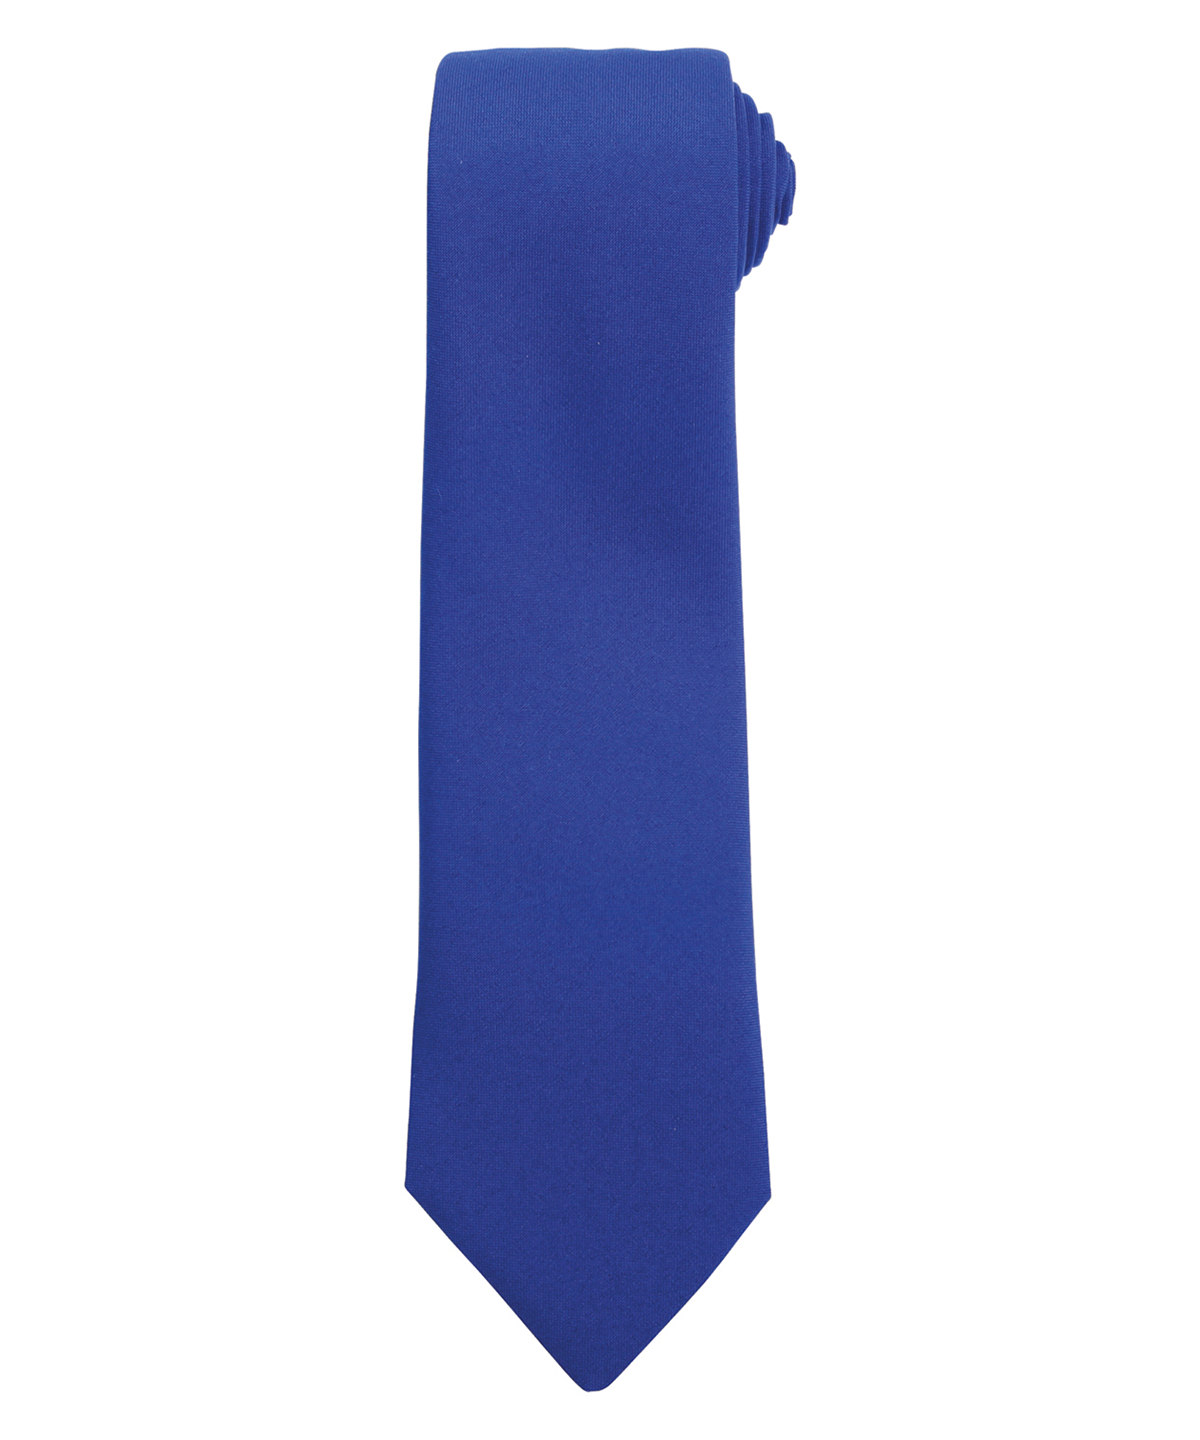 Work Tie Royal Size One Size